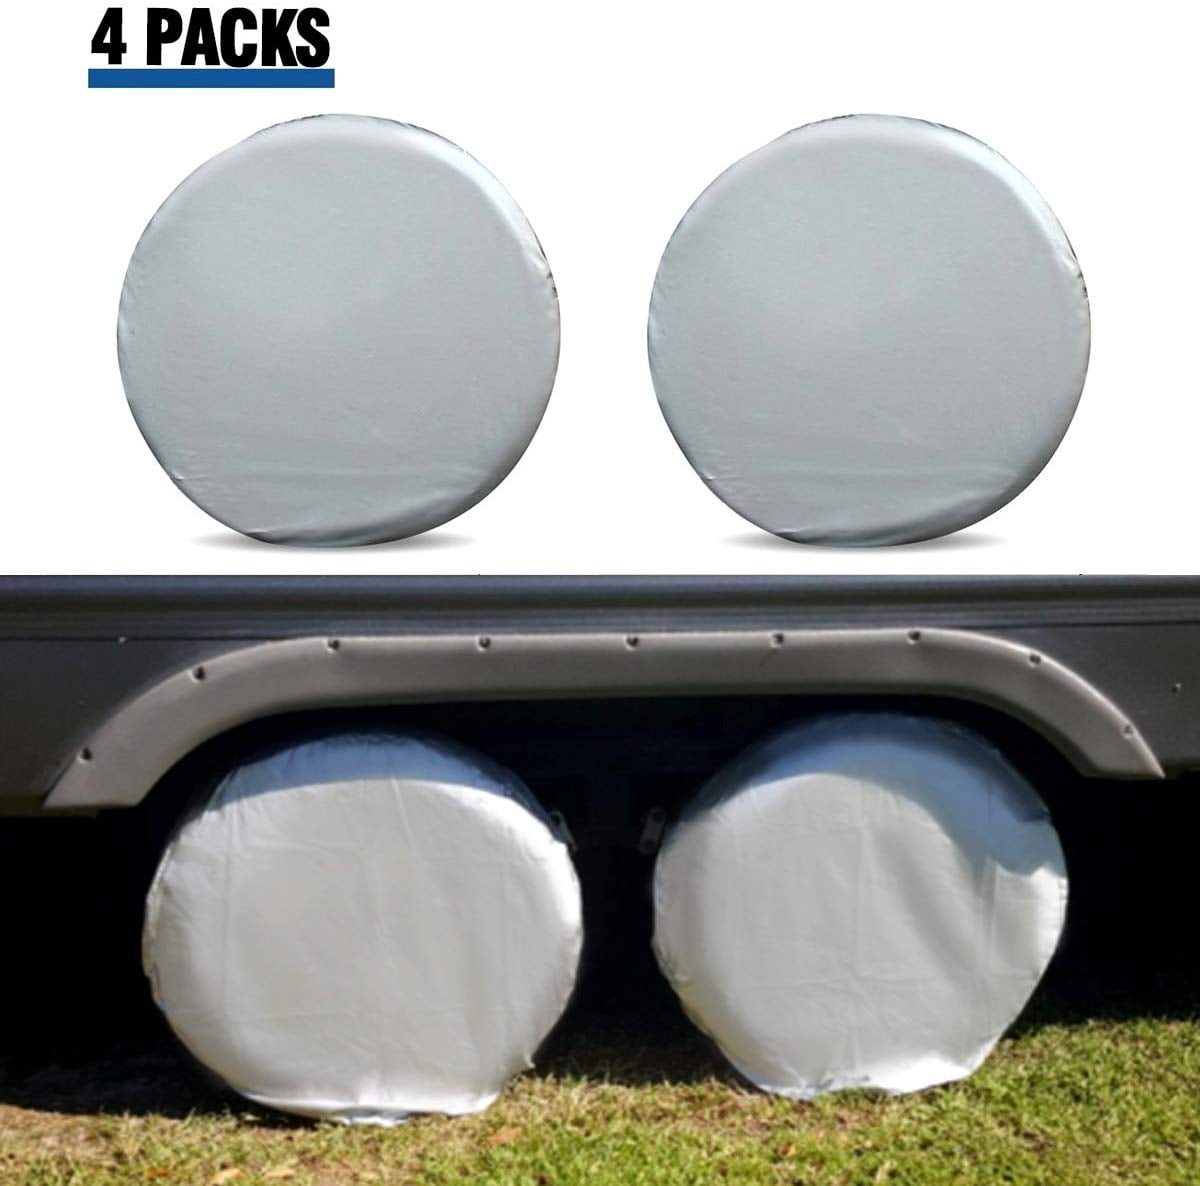 4 Pack Camper,Universal Fits 24 to 32 Car Tire Diameter Aebitsry Tire Covers for RV Wheel, Black, 24-26 Motorhome Wheel Covers Waterproof Oxford Sun UV Tires Protector for Trailer 